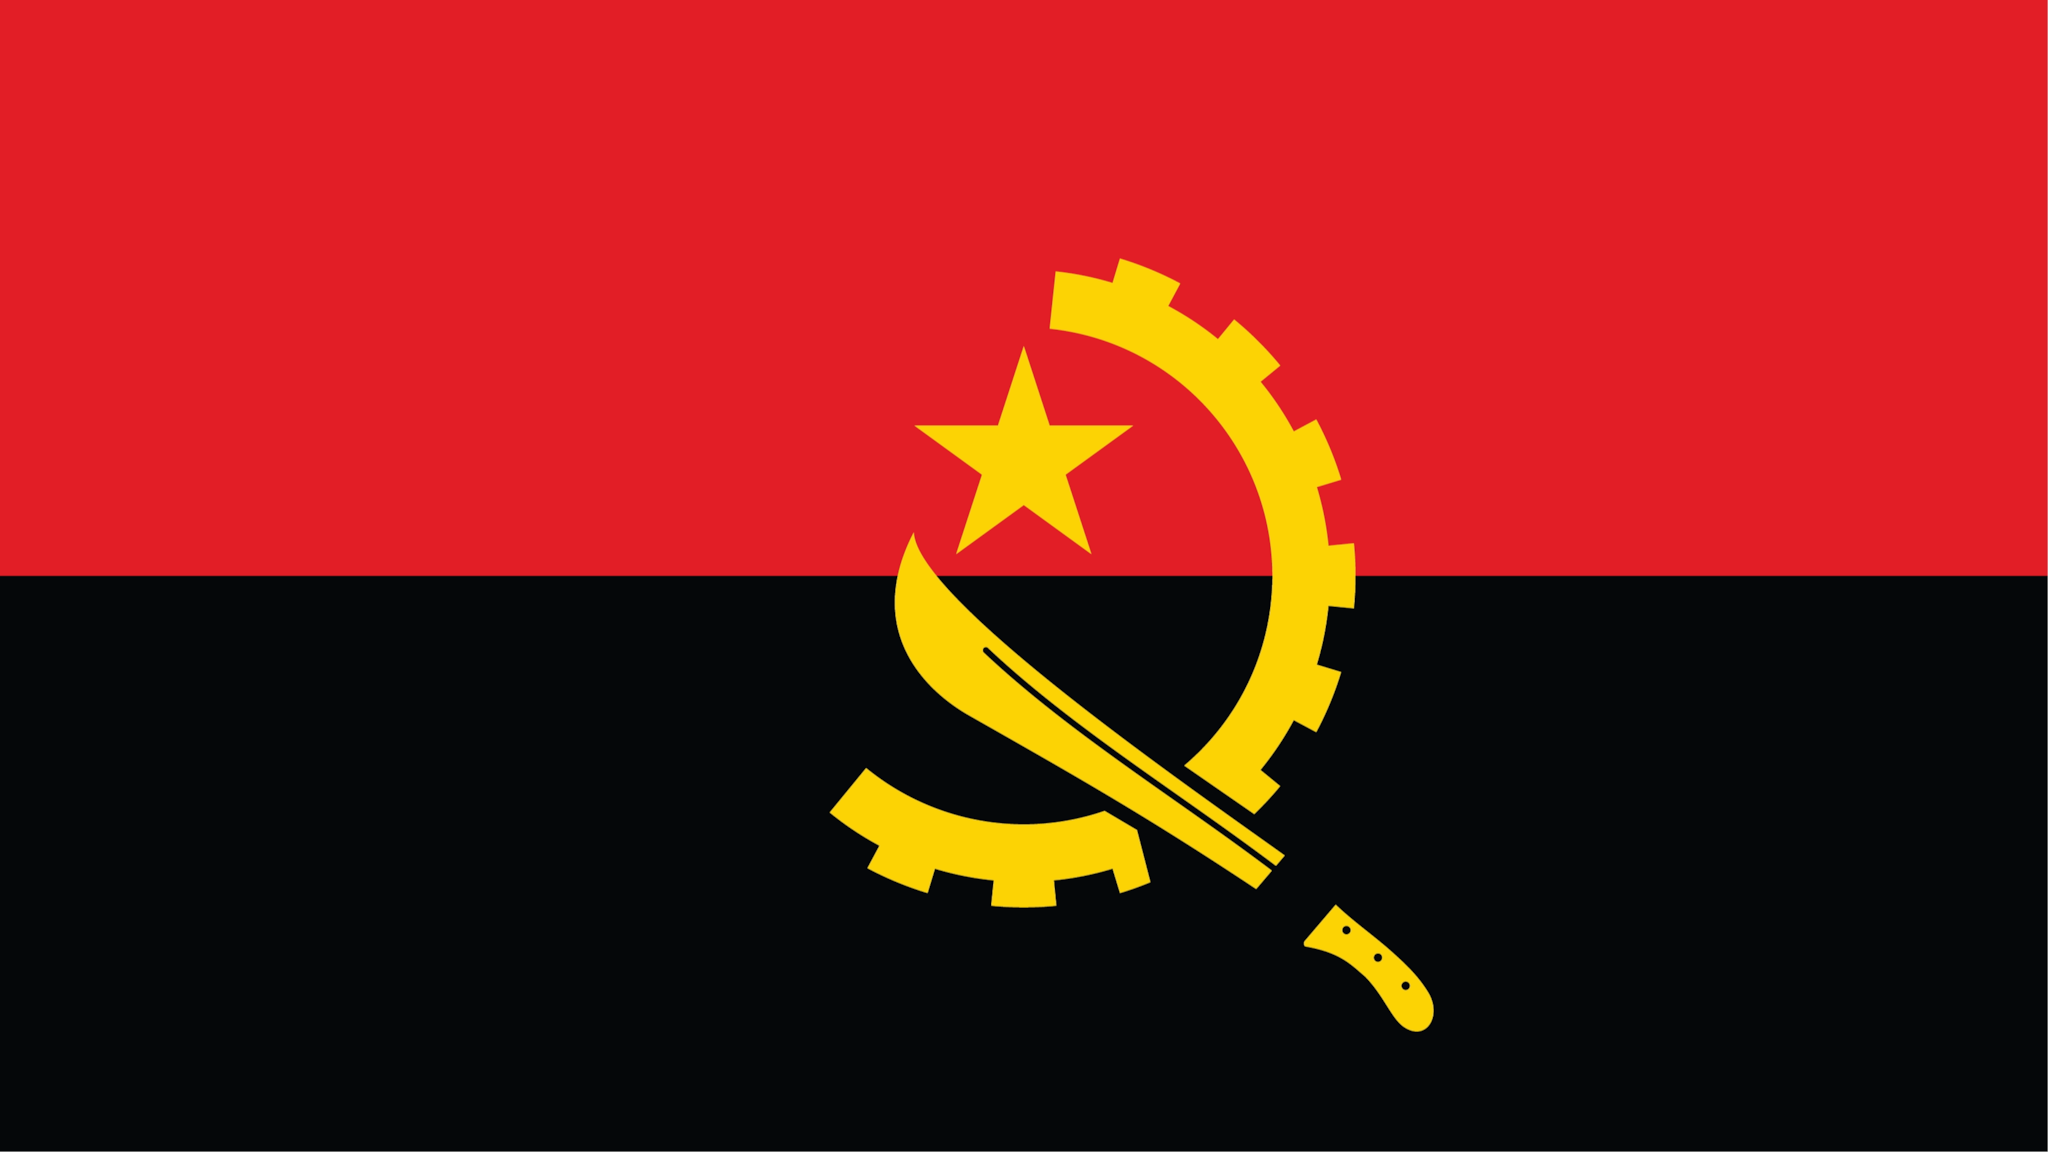 Two horizontal bands of red and black. There is a yellow icon (half gearwheel and machete with a yellow star) placed in the middle of the stripes.